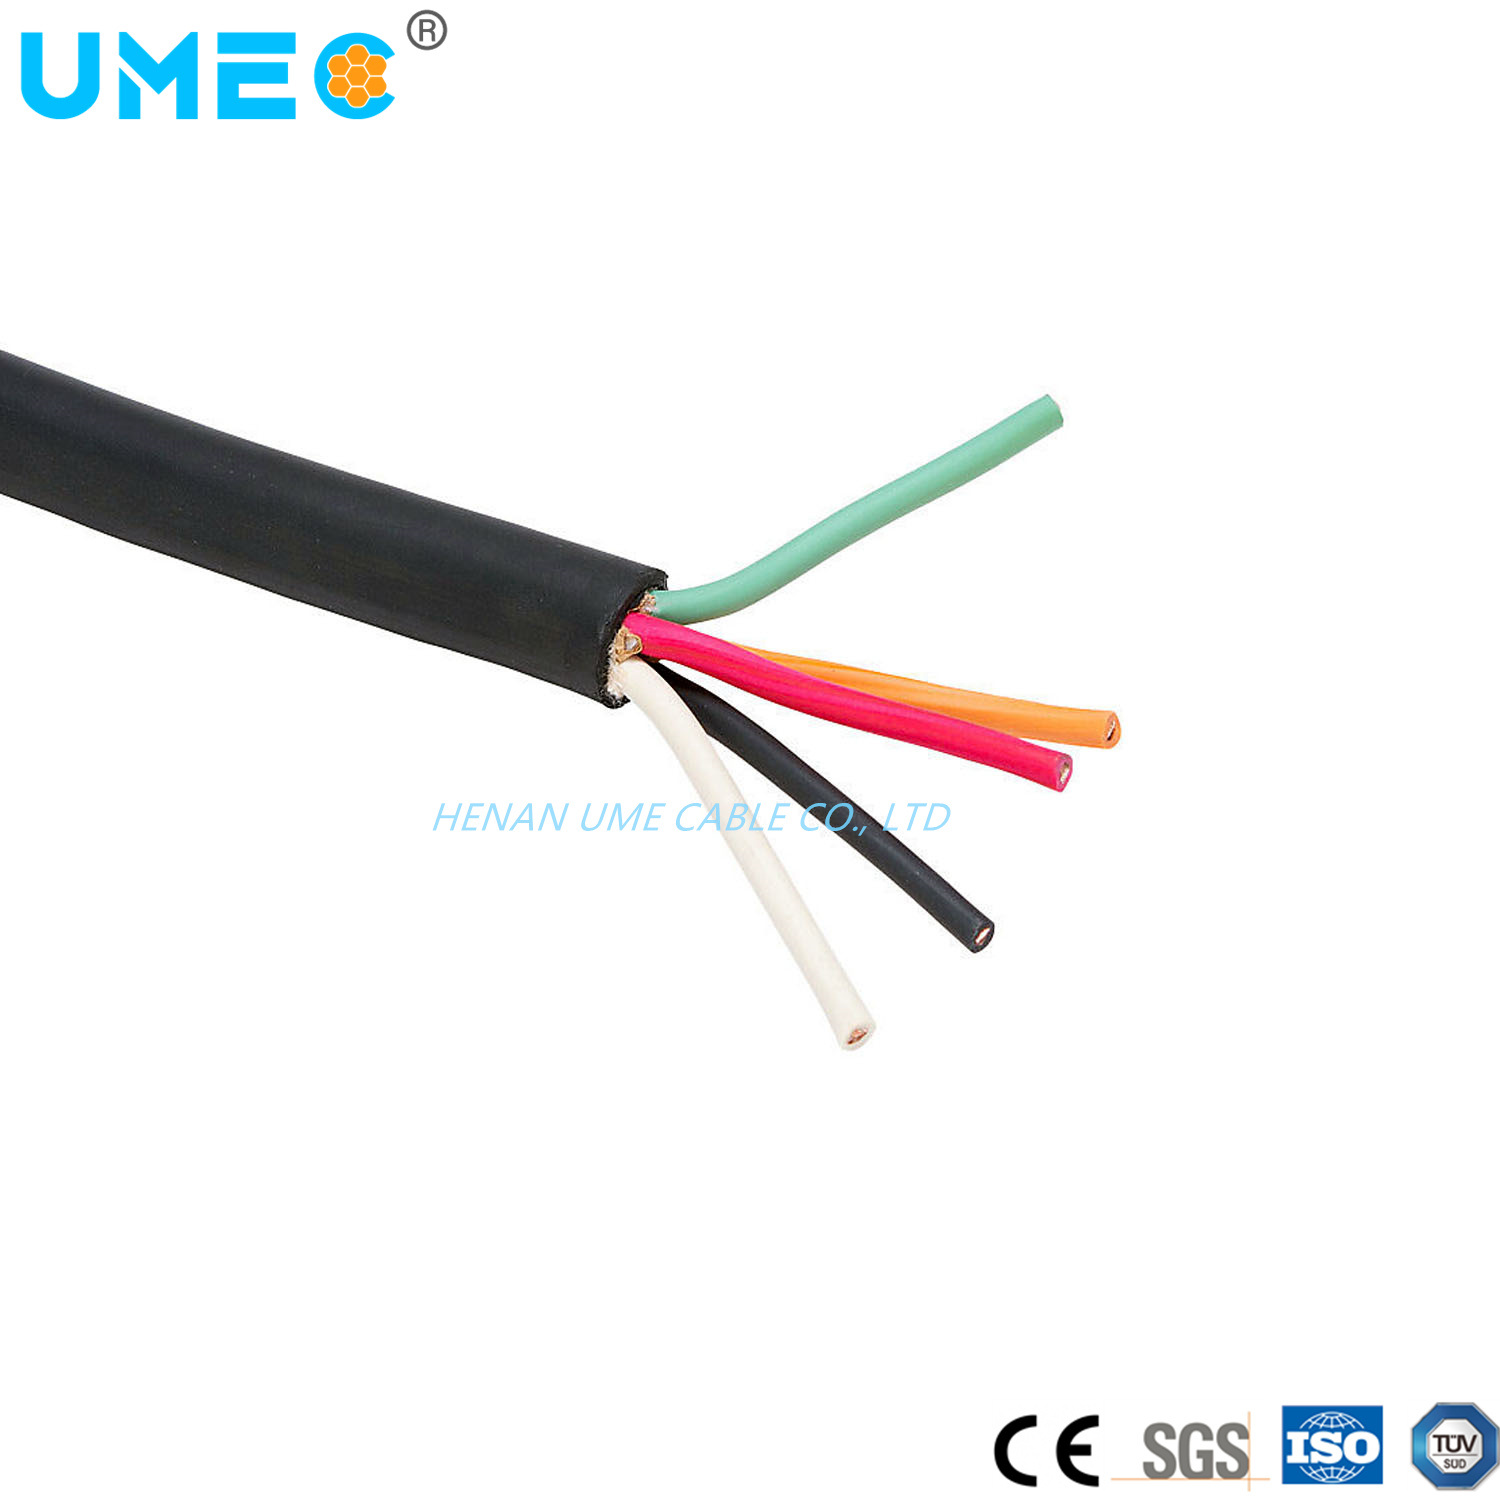 American Standard Industrial Equipment Low Voltage Rubber Cable EPDM Compound Insulated Epr/CPE Jacket Soow Sjoow Cable 18AWG